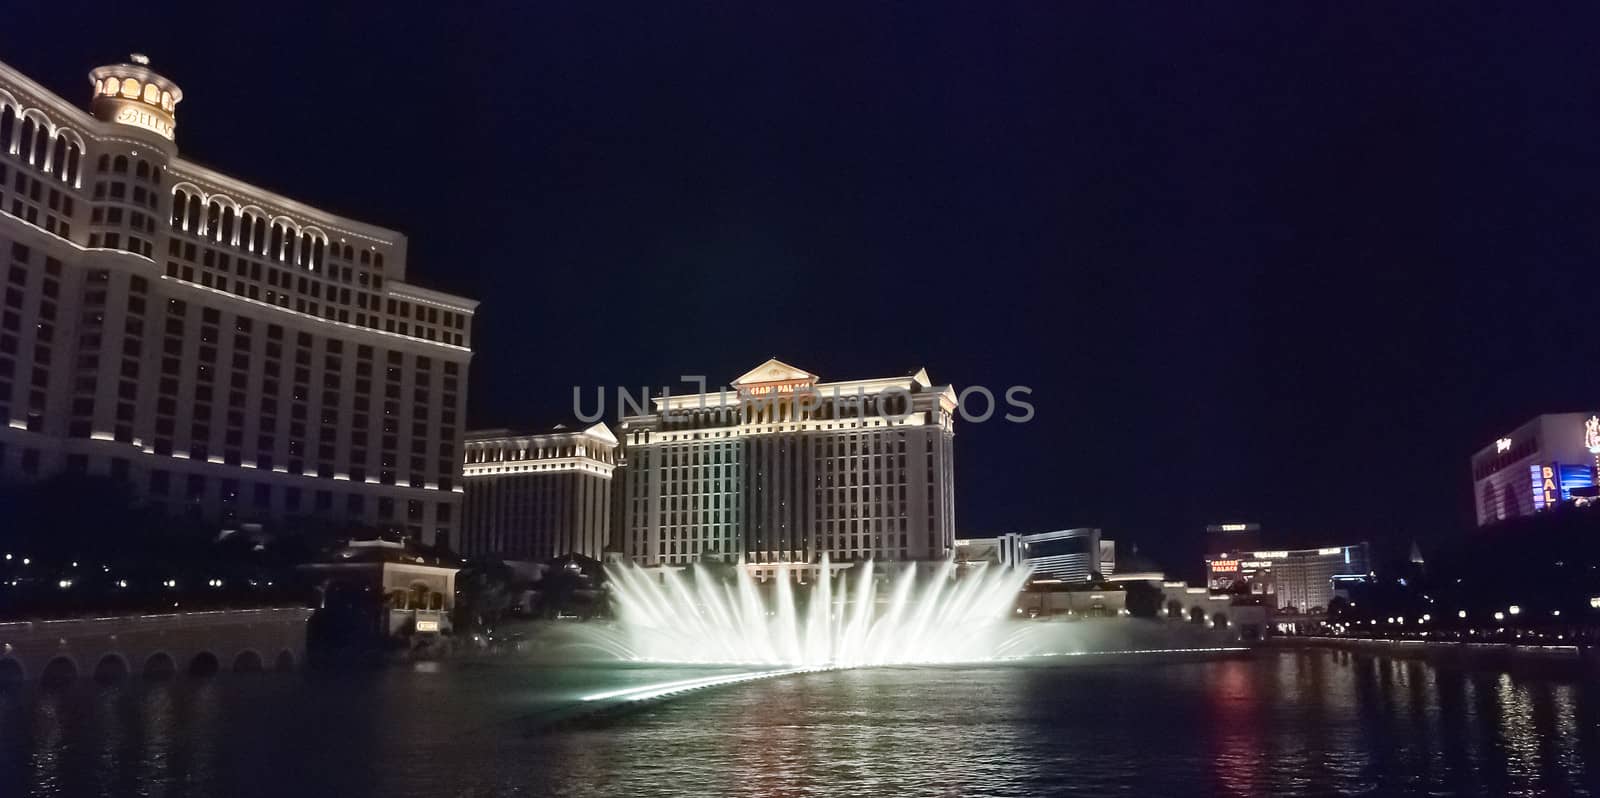 LAS VEGAS, USA - The Bellagio Fountains at night by hanusst